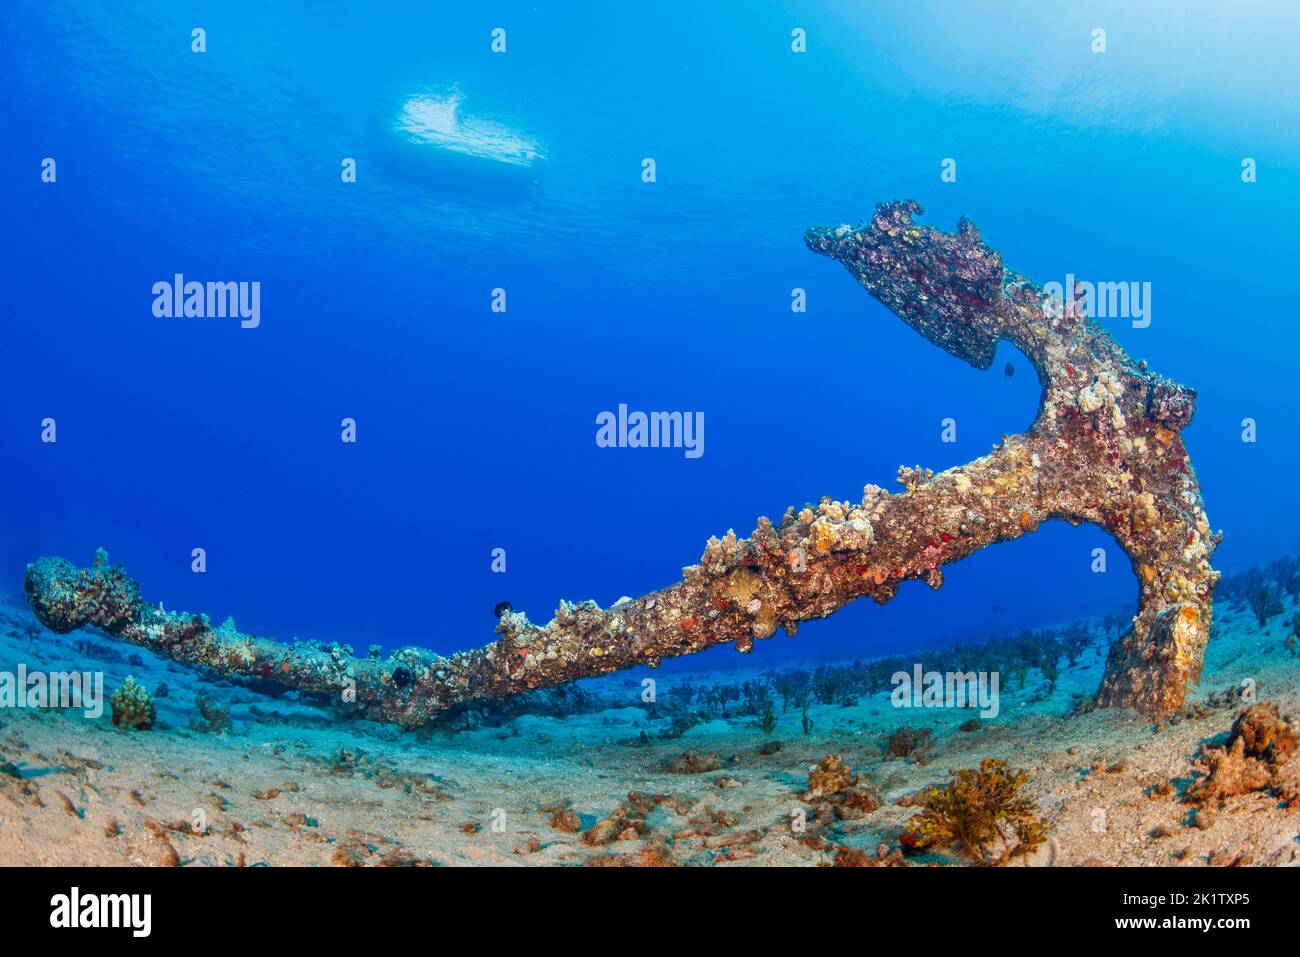 An old anchor rests on a sandy bottom off the island of Maui, Hawaii, USA. A boat on the surface attests to the clear waters. Stock Photo